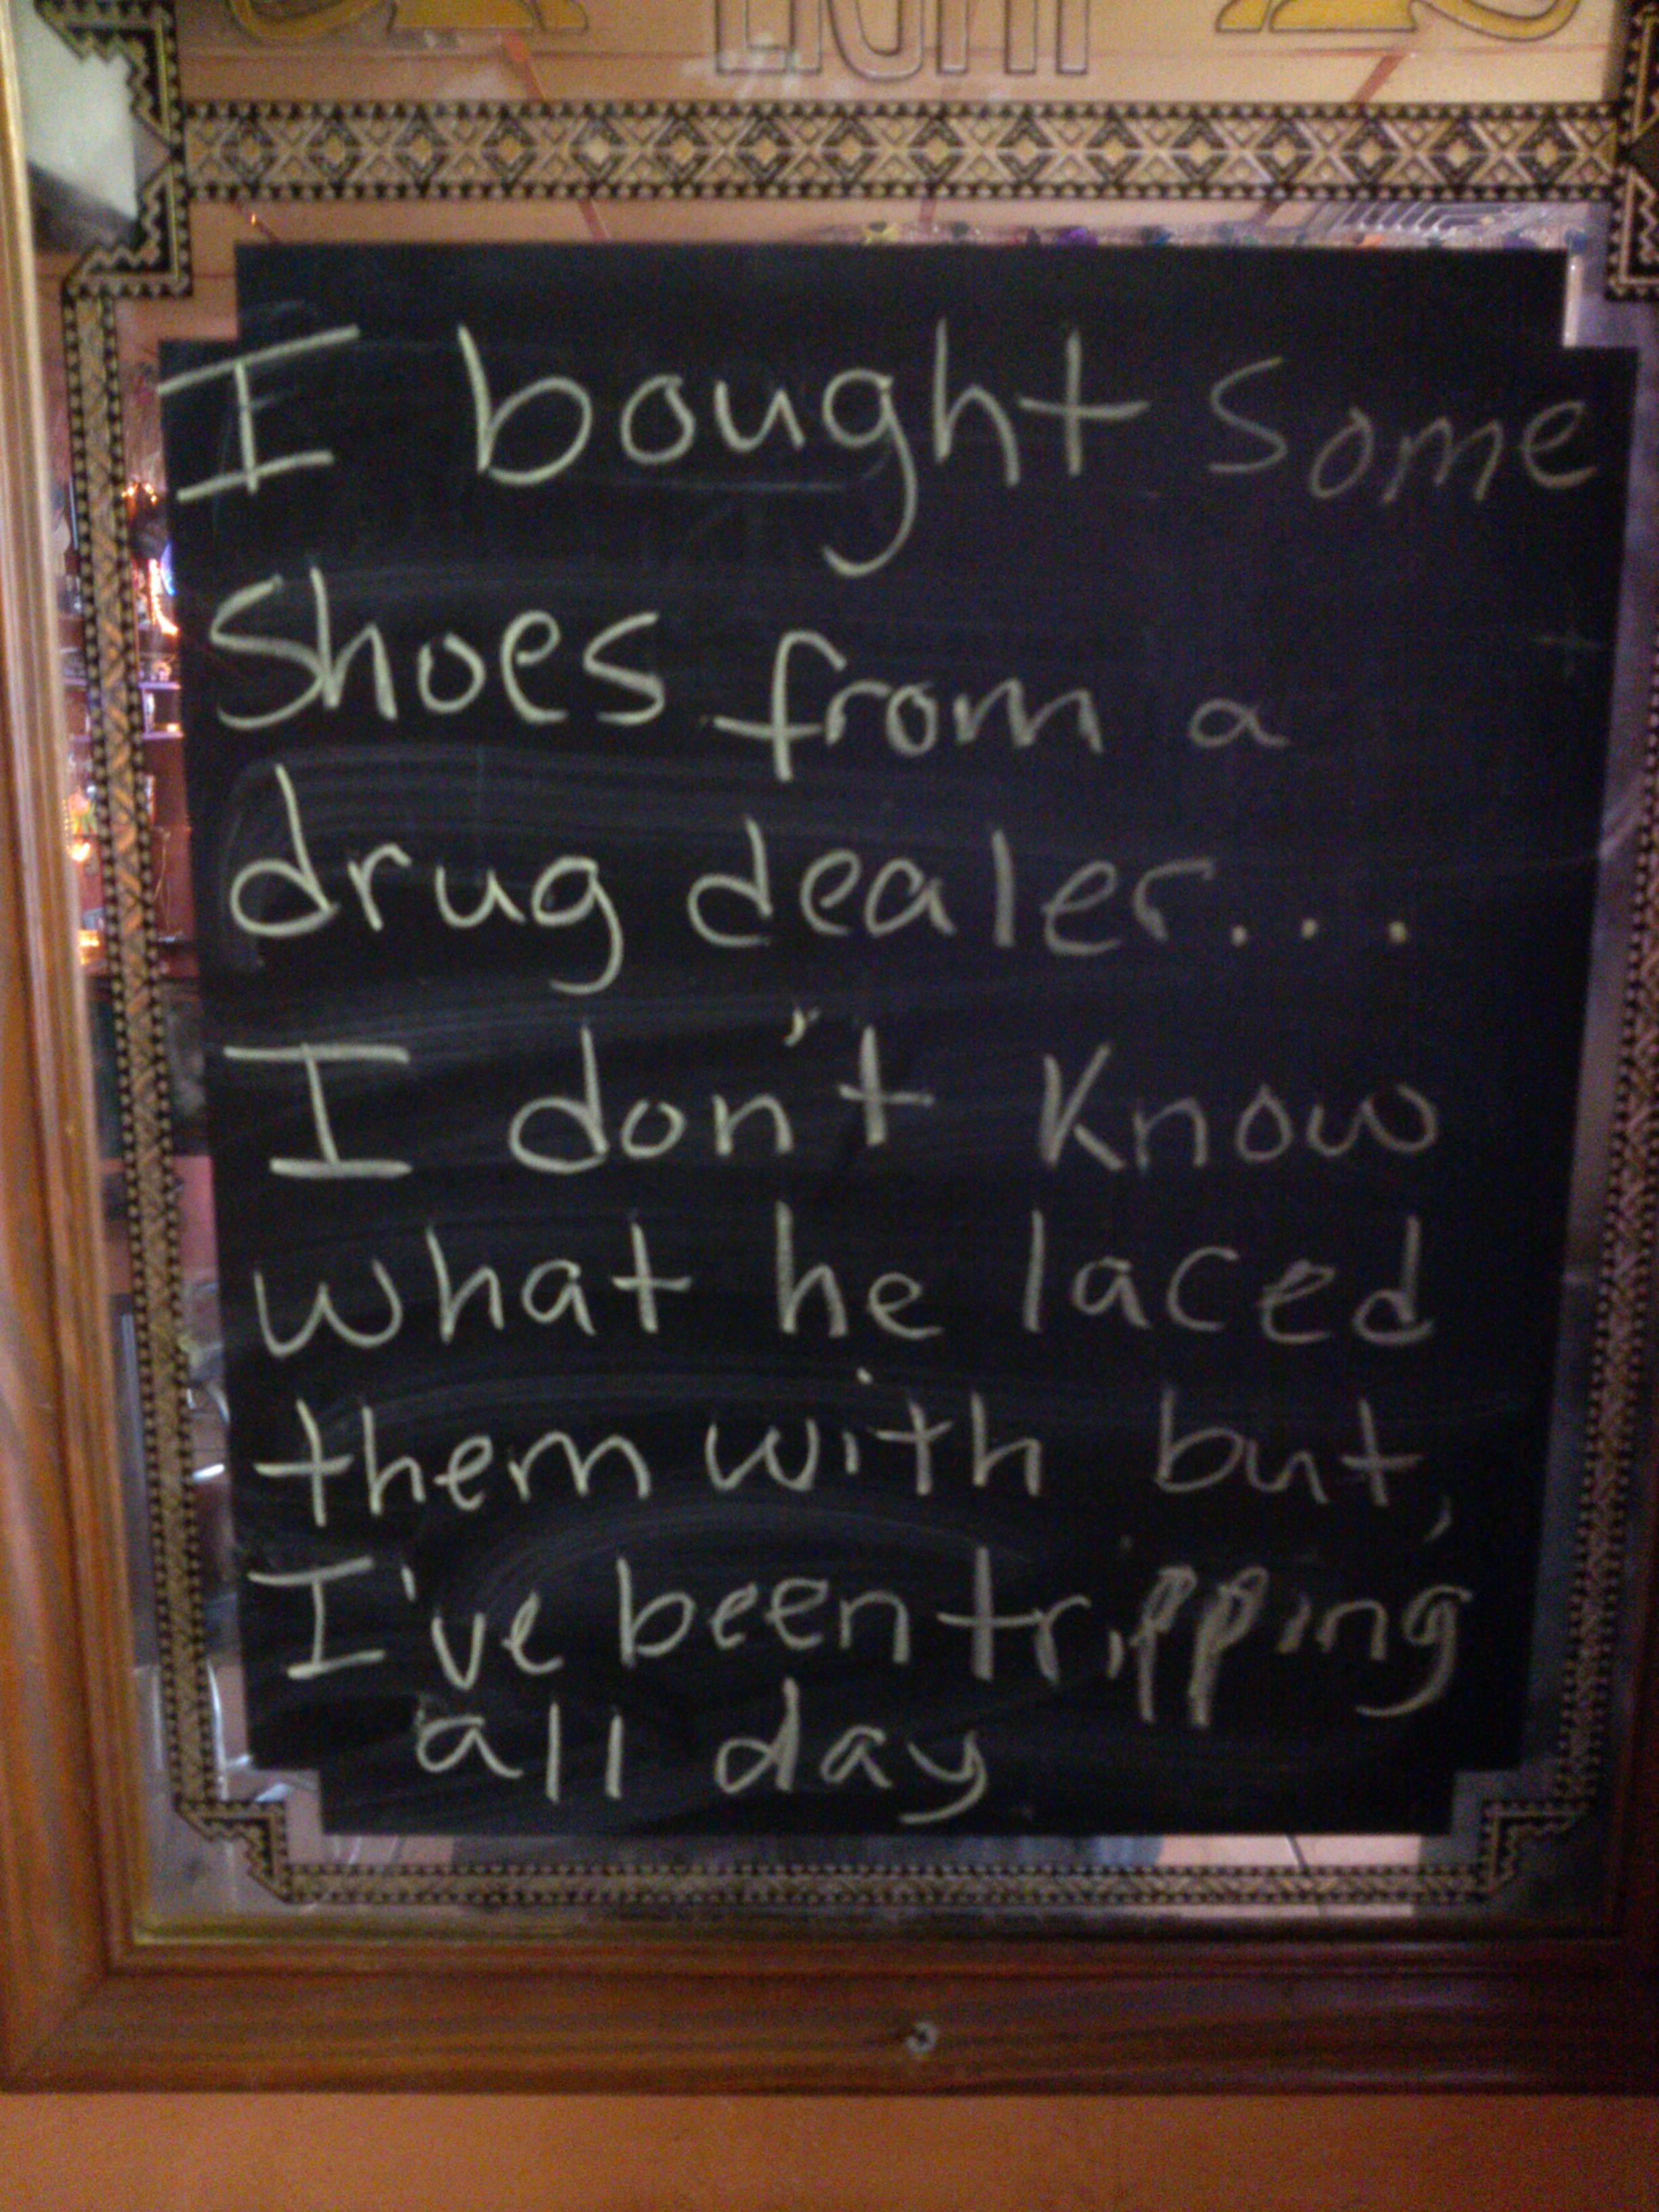 dad jokes - blackboard - I bought some Shoes from a drug dealer... I don't know what he laced them with but I've been tripping Lll day .